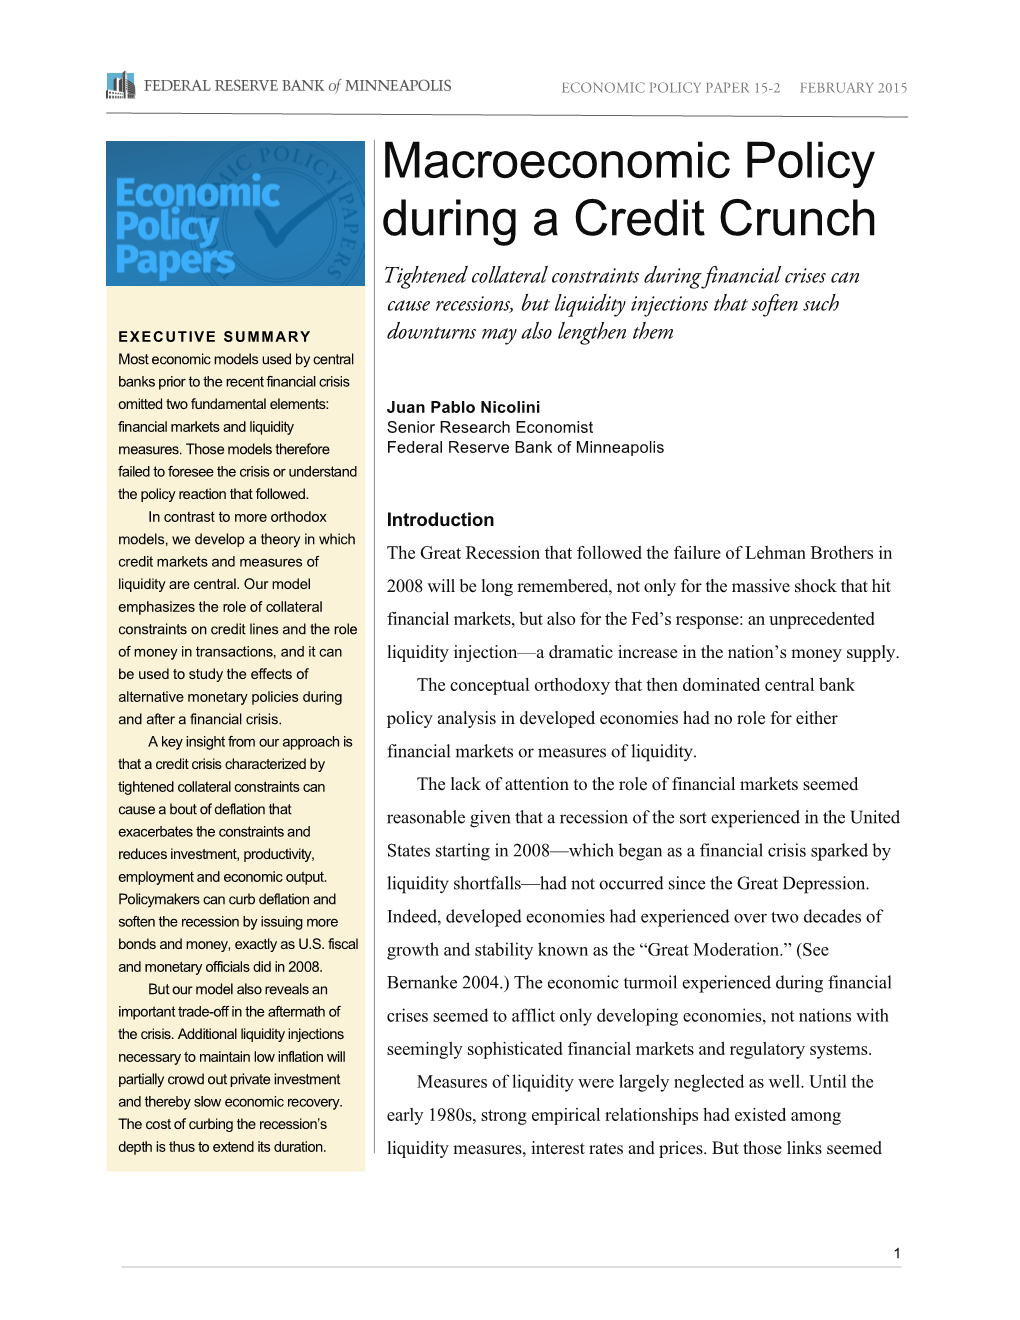 Macroeconomic Policy During a Credit Crunch